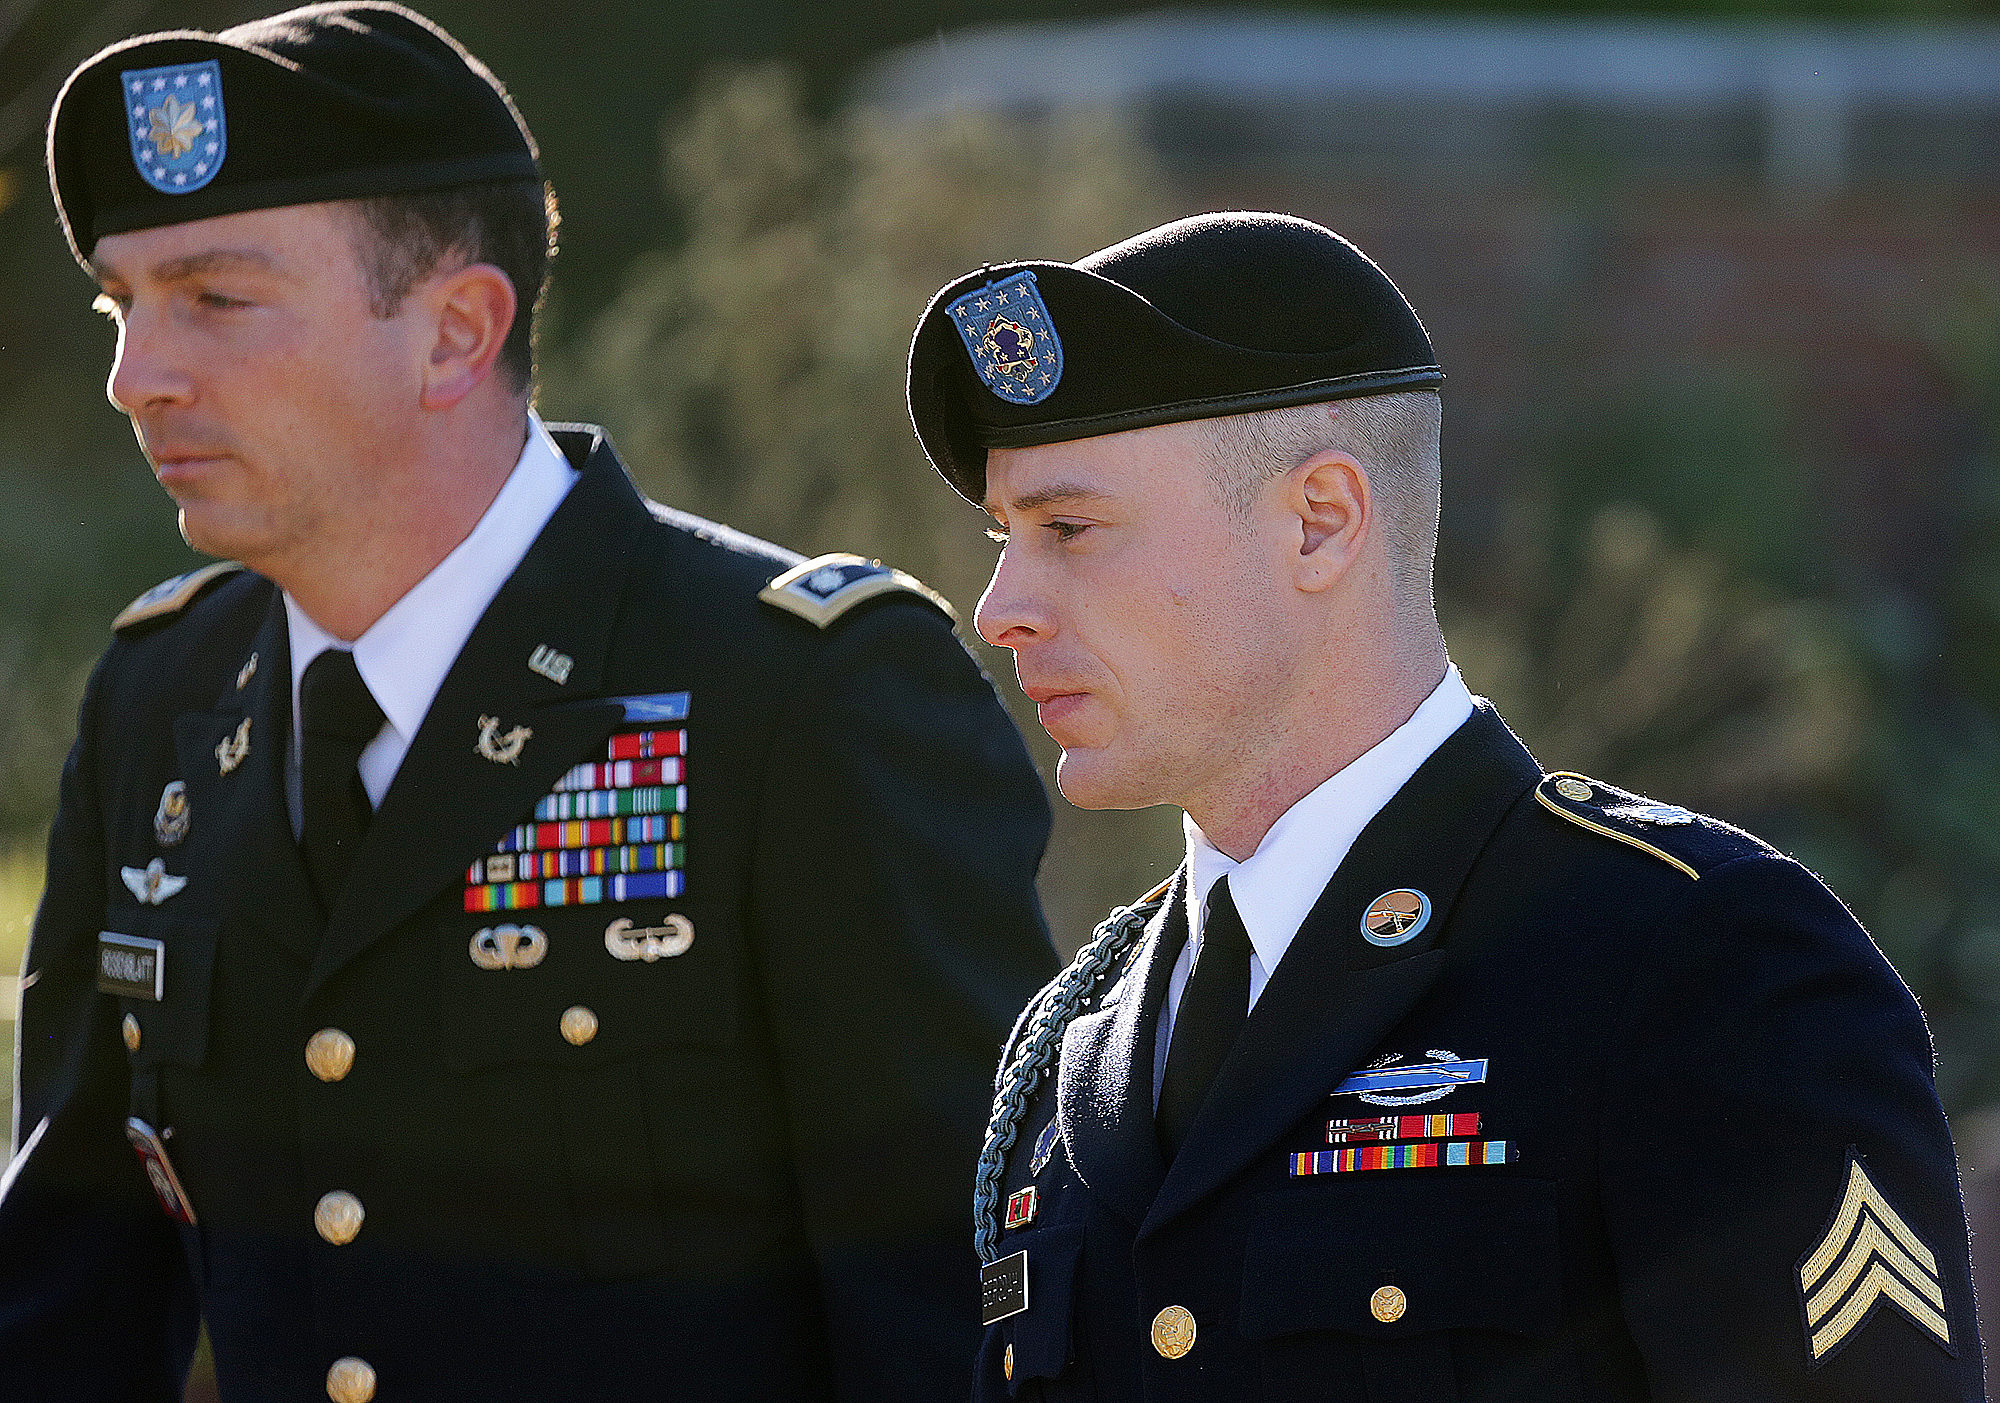 PHOTO: Army Sgt. Bowe Bergdahl arrives for a pretrial hearing at Fort Bragg, N.C., with his defense counsel Lt. Col. Franklin D. Rosenblatt on Jan. 12, 2016. 